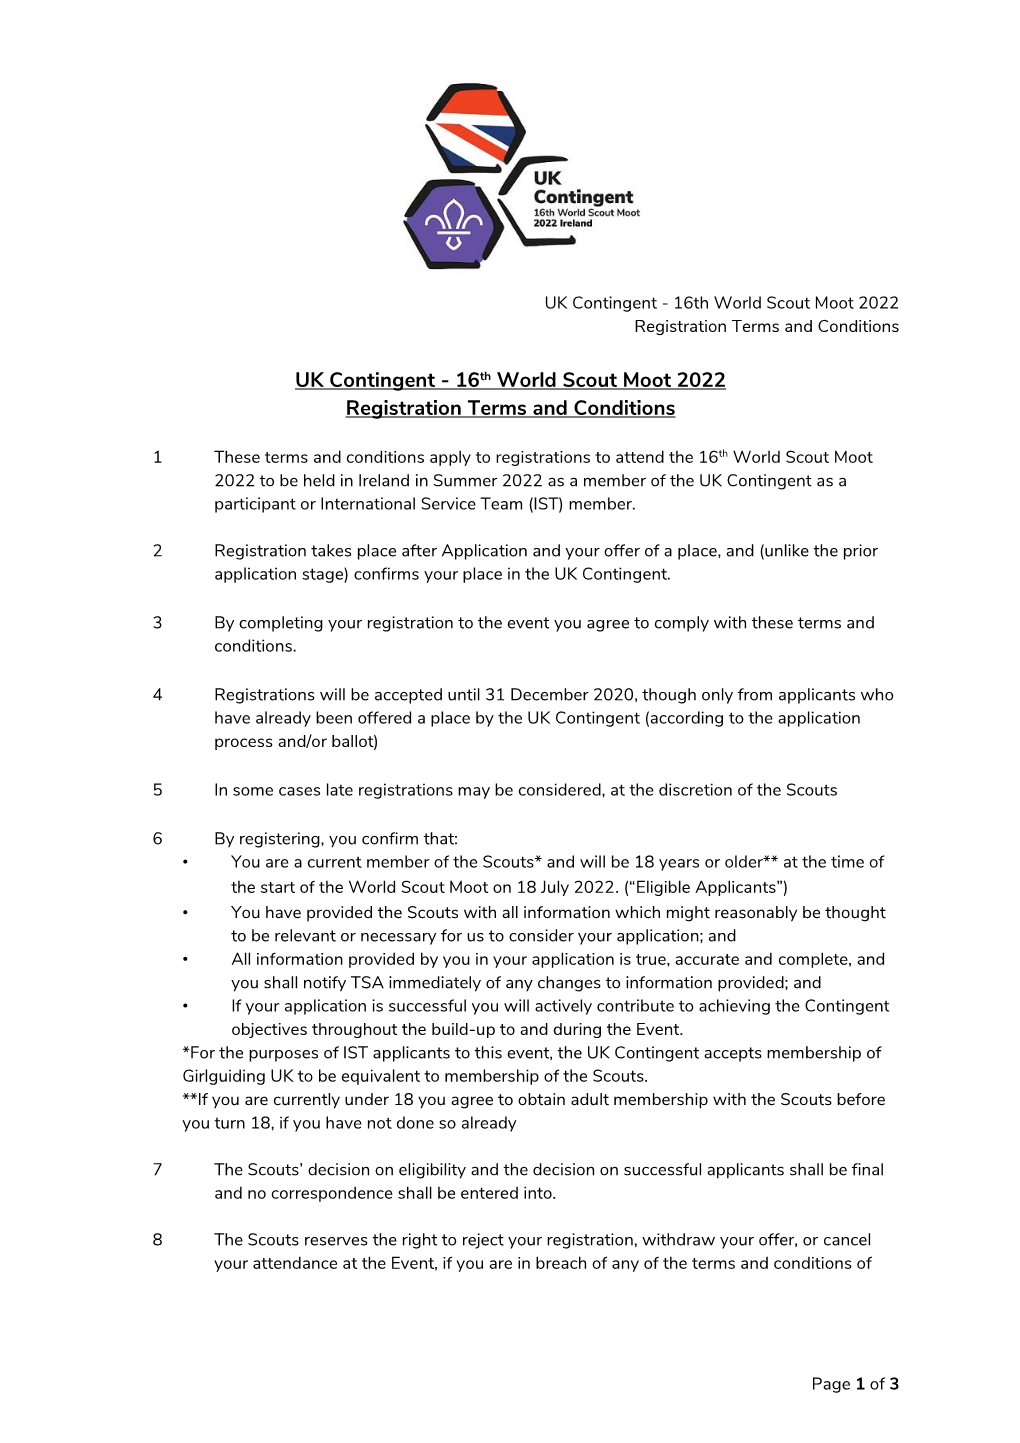 UK Contingent - 16Th World Scout Moot 2022 Registration Terms and Conditions